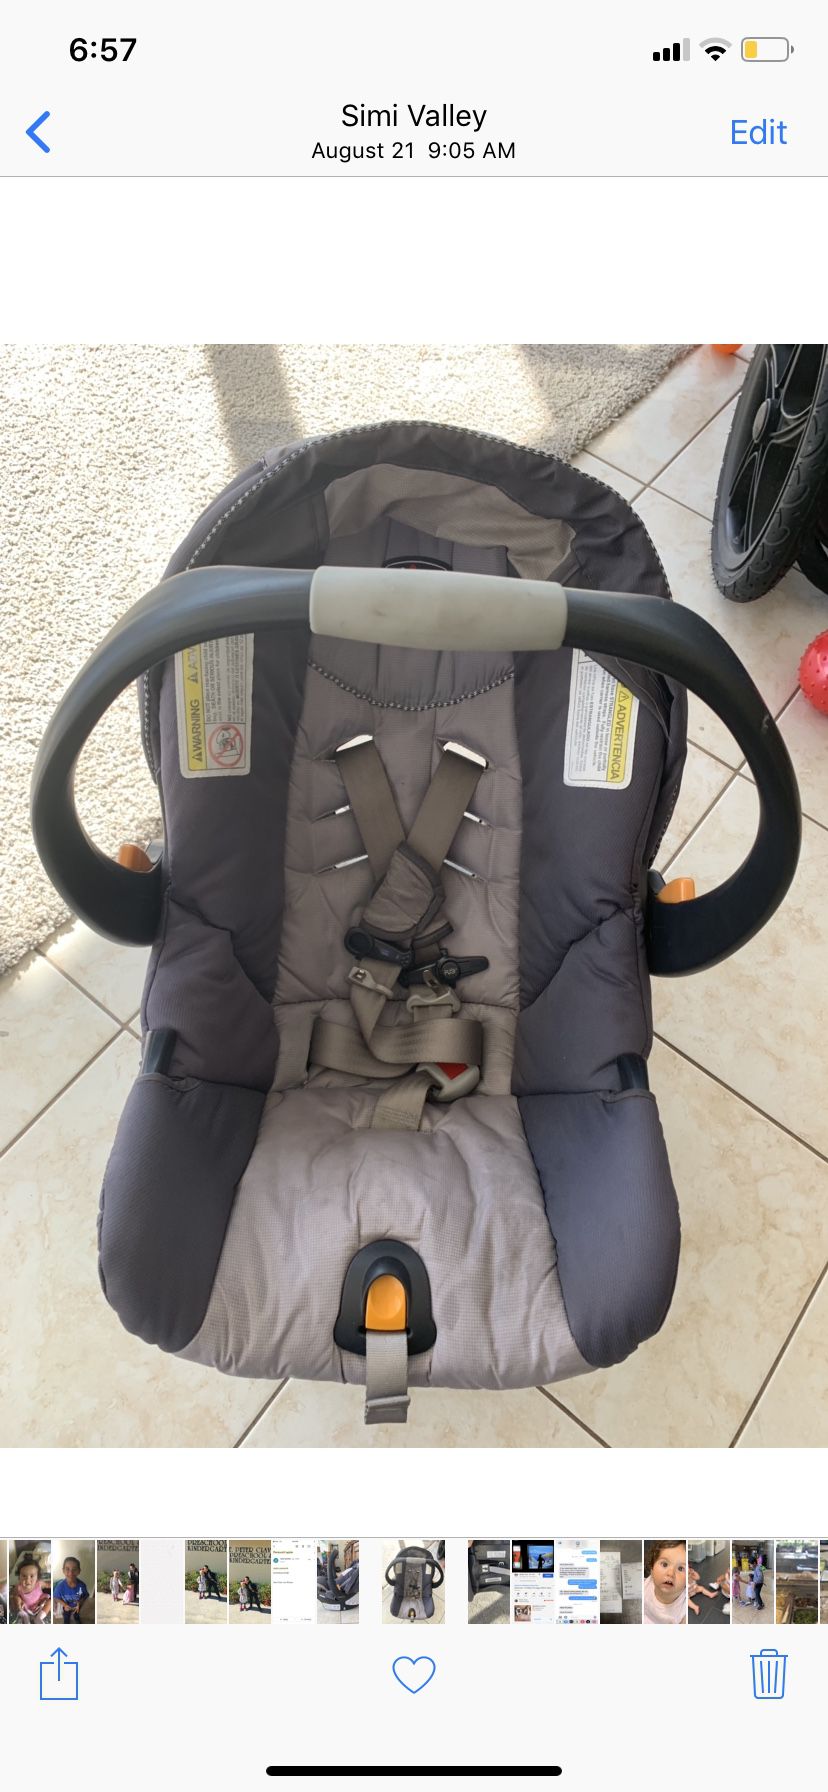 Chicco Carfit keyfit 30 car seat infant bought last year